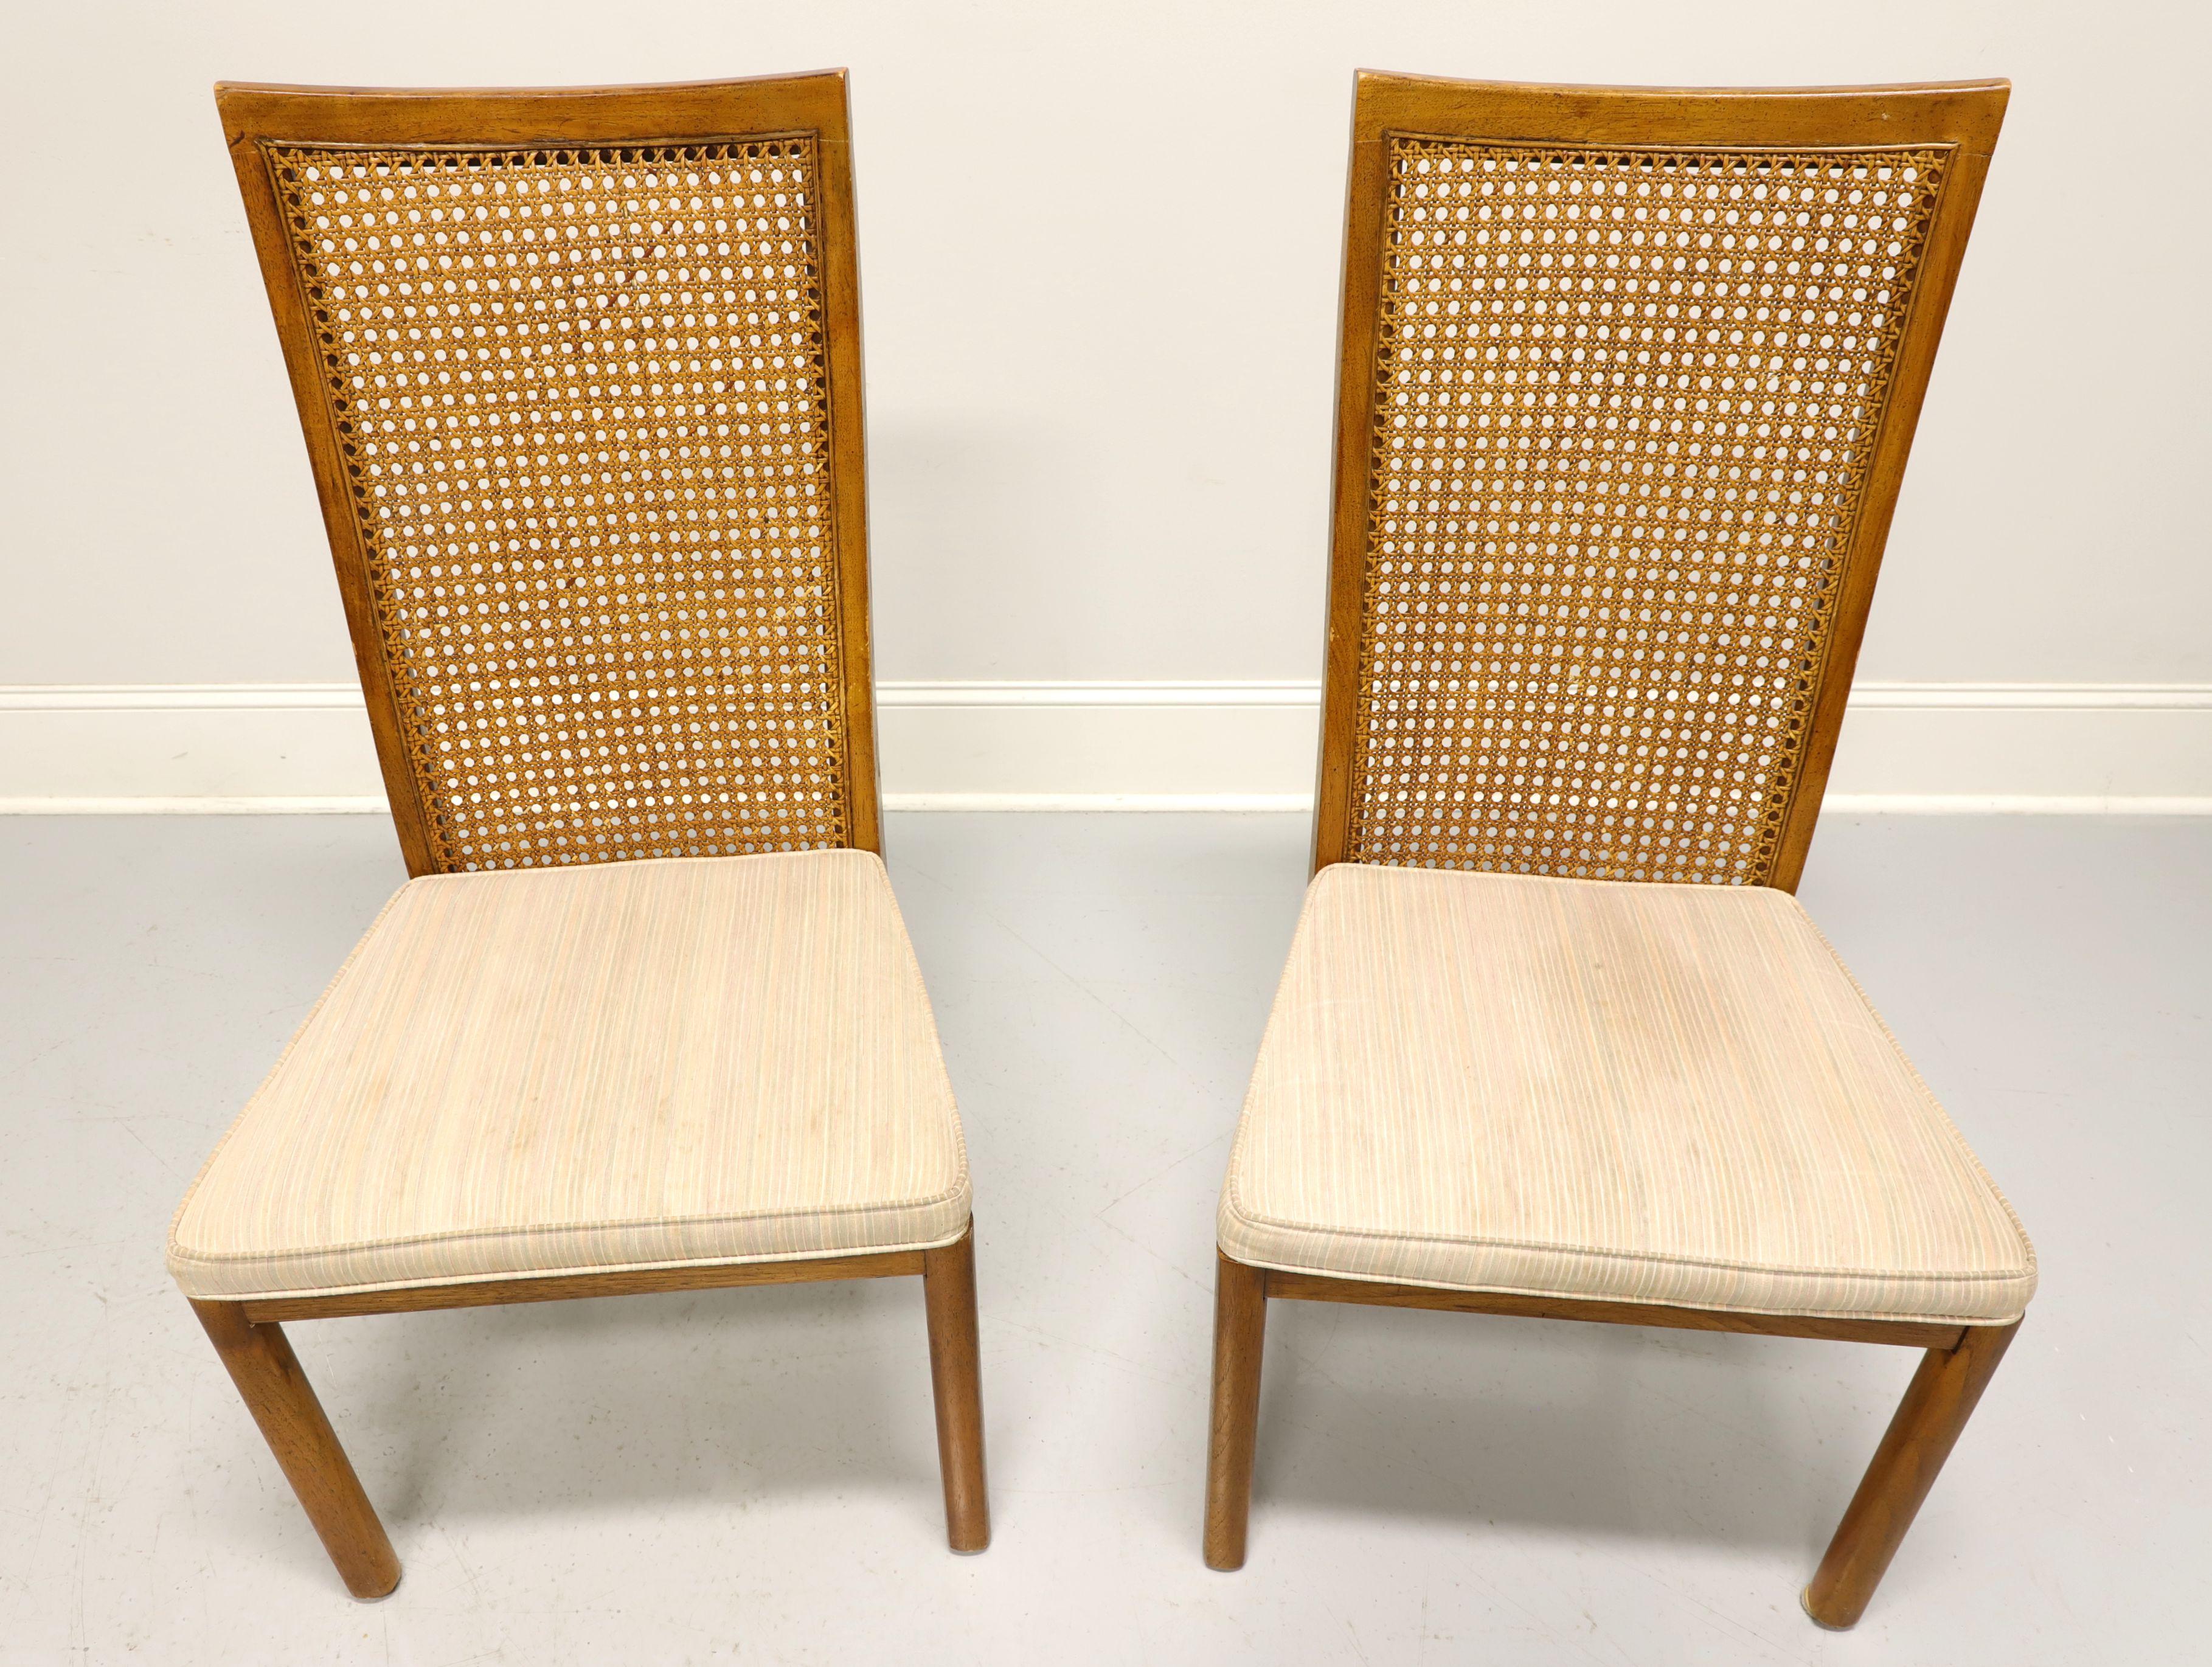 A pair of campaign style dining side chairs by Drexel Heritage, from their Accolade Collection. Pecan with a golden finish, high caned back, neutral color fabric upholstered seat and straight front legs. Made in North Carolina, USA, in the late 20th